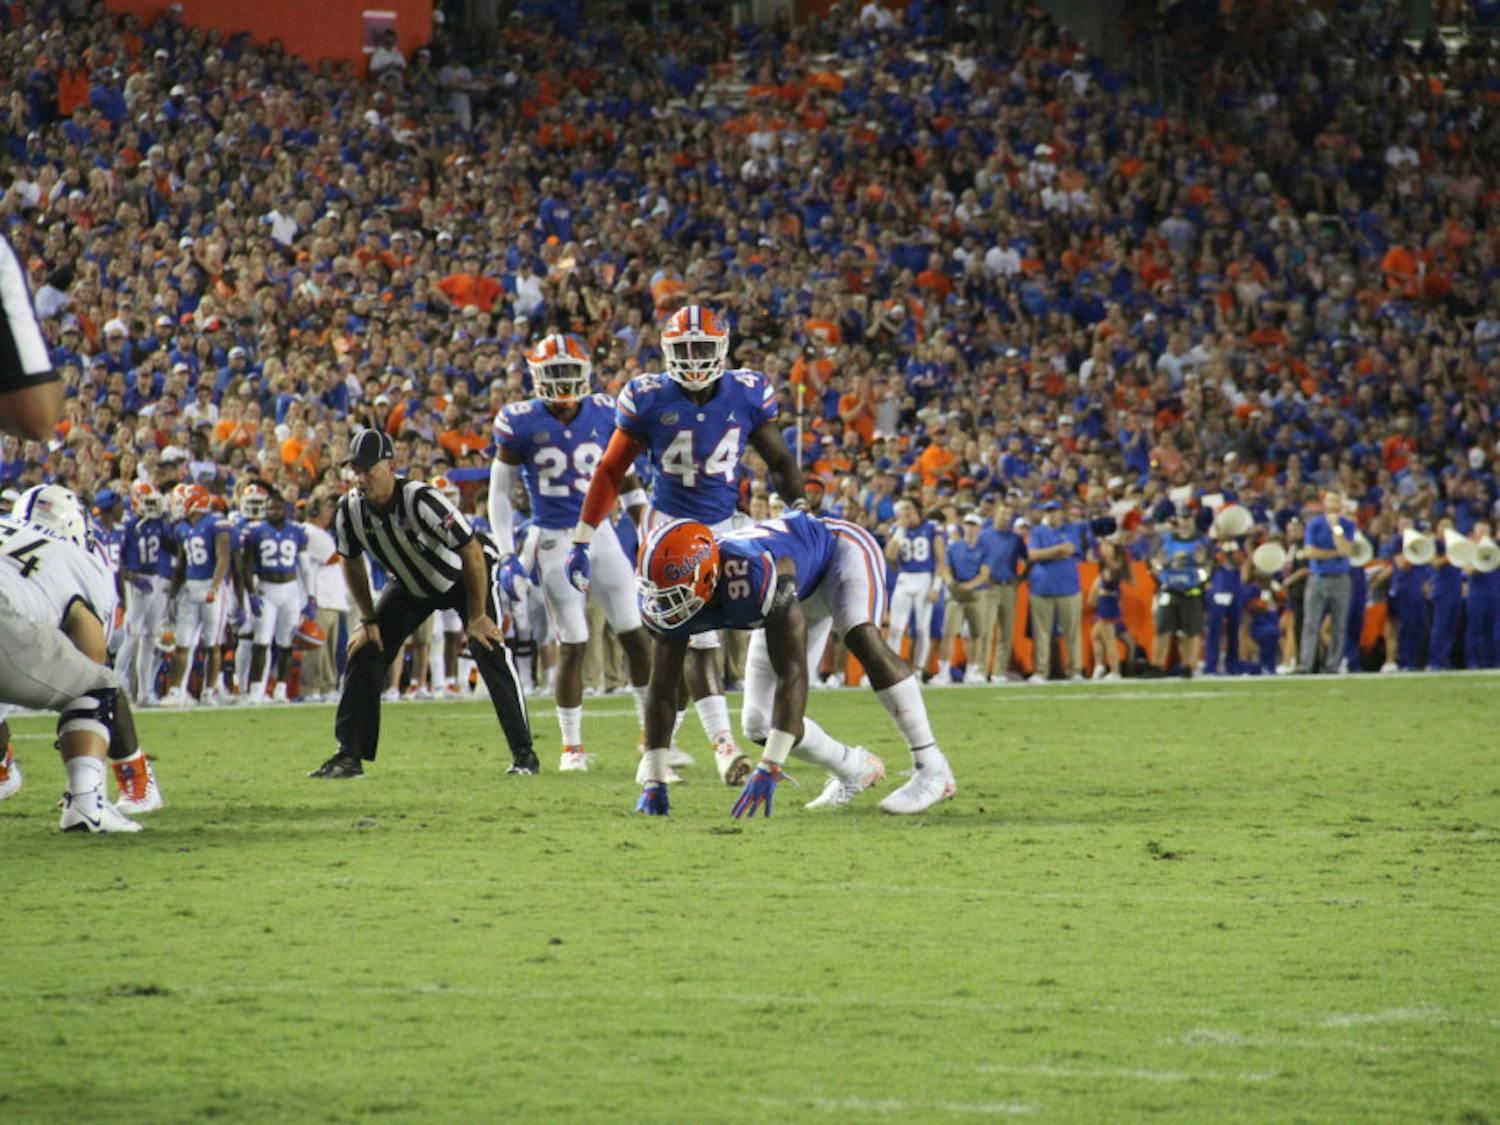 Linebacker Rayshad Jackson (44) said the Gators are using their bye week to get younger players more experience for in-game situations. "Now this whole week, we're not coming in at 8:15, so we get enough sleep," he said.